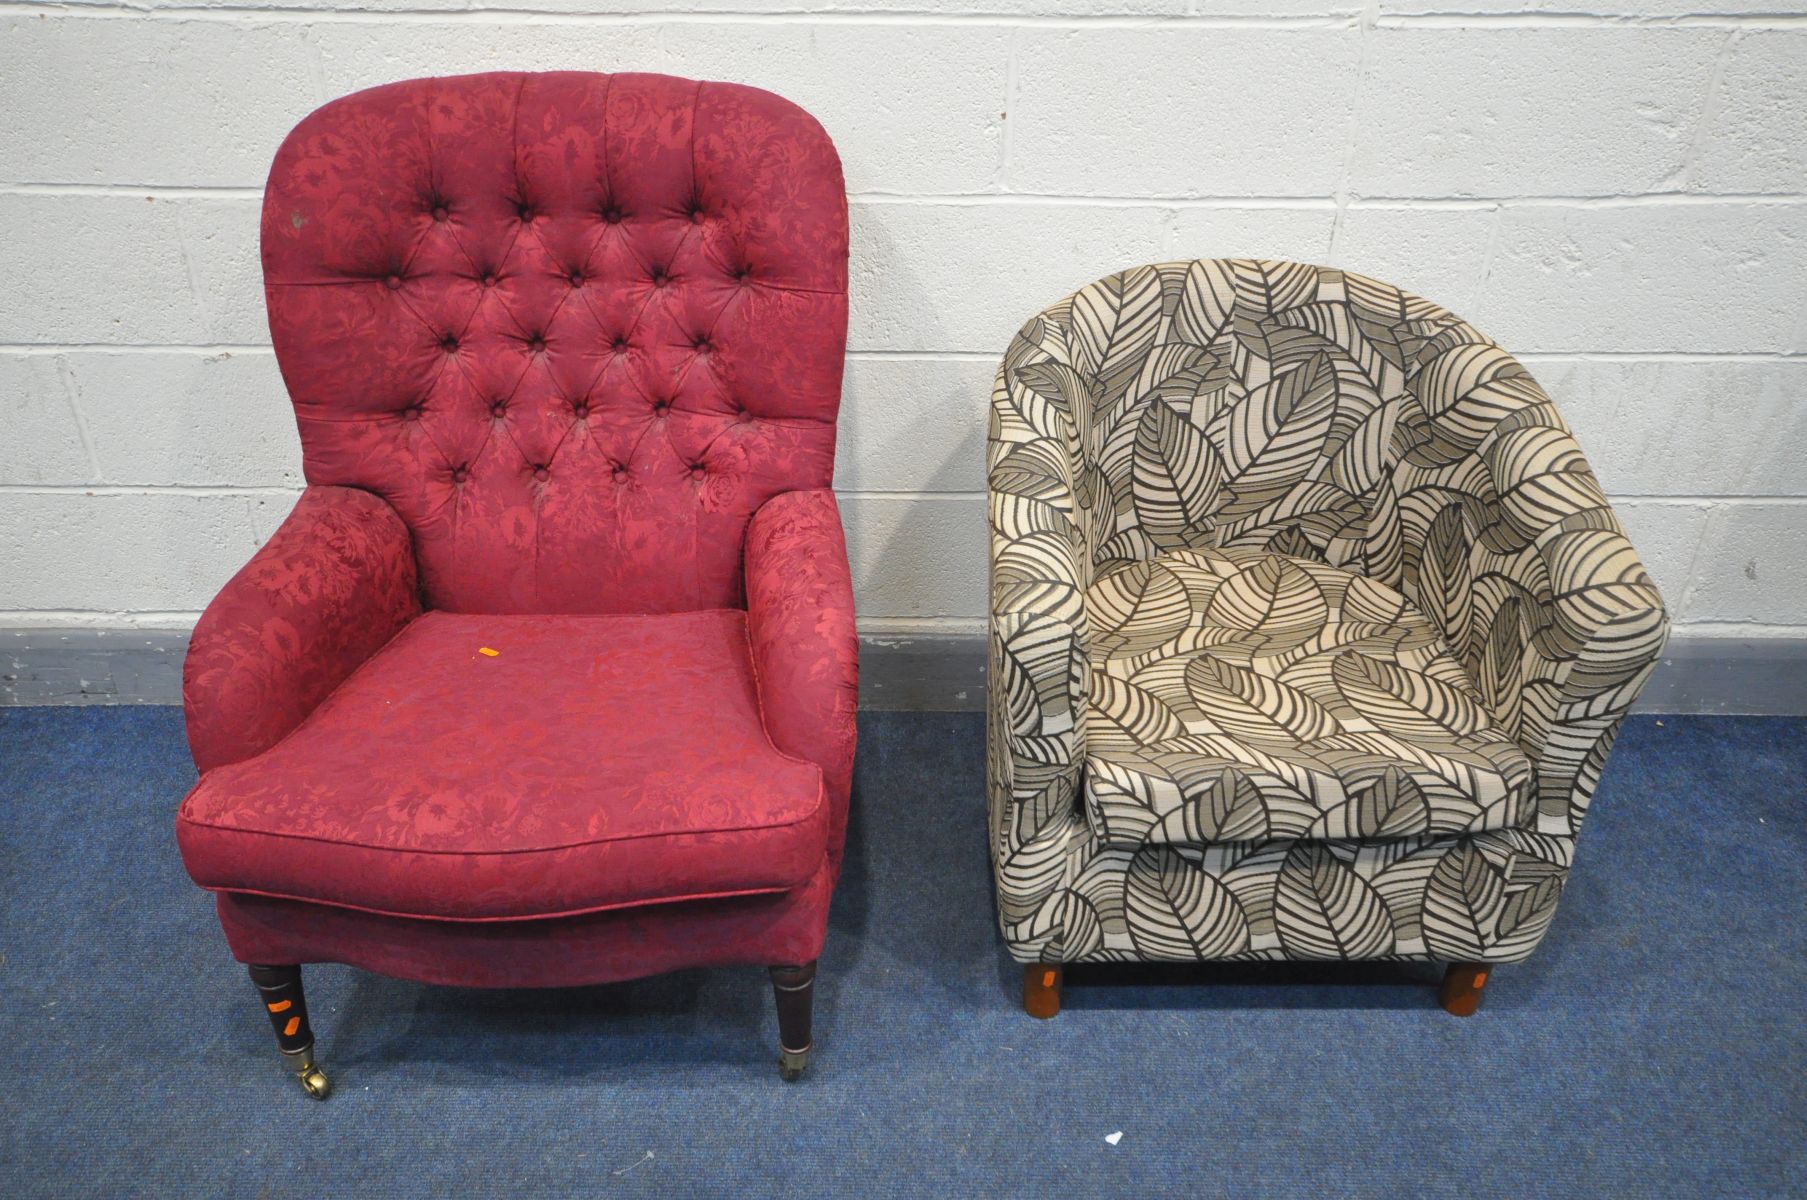 A PARKER KNOLL BUTTONED RED UPHOLSERED ARMCHAIR, on brass caps and casters, along with a floral